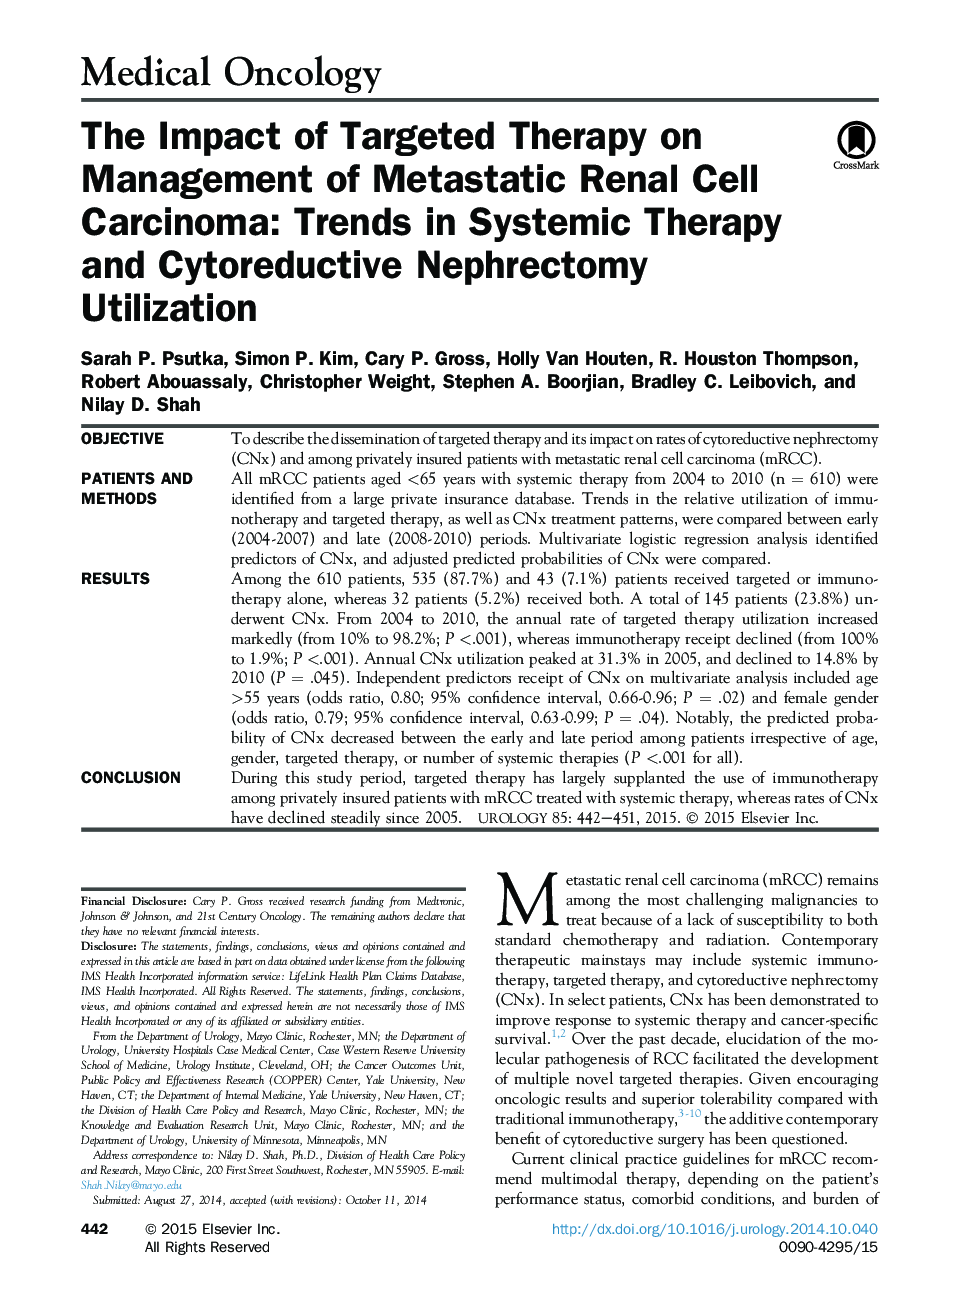 The Impact of Targeted Therapy on Management of Metastatic Renal Cell Carcinoma: Trends in Systemic Therapy and Cytoreductive Nephrectomy Utilization 